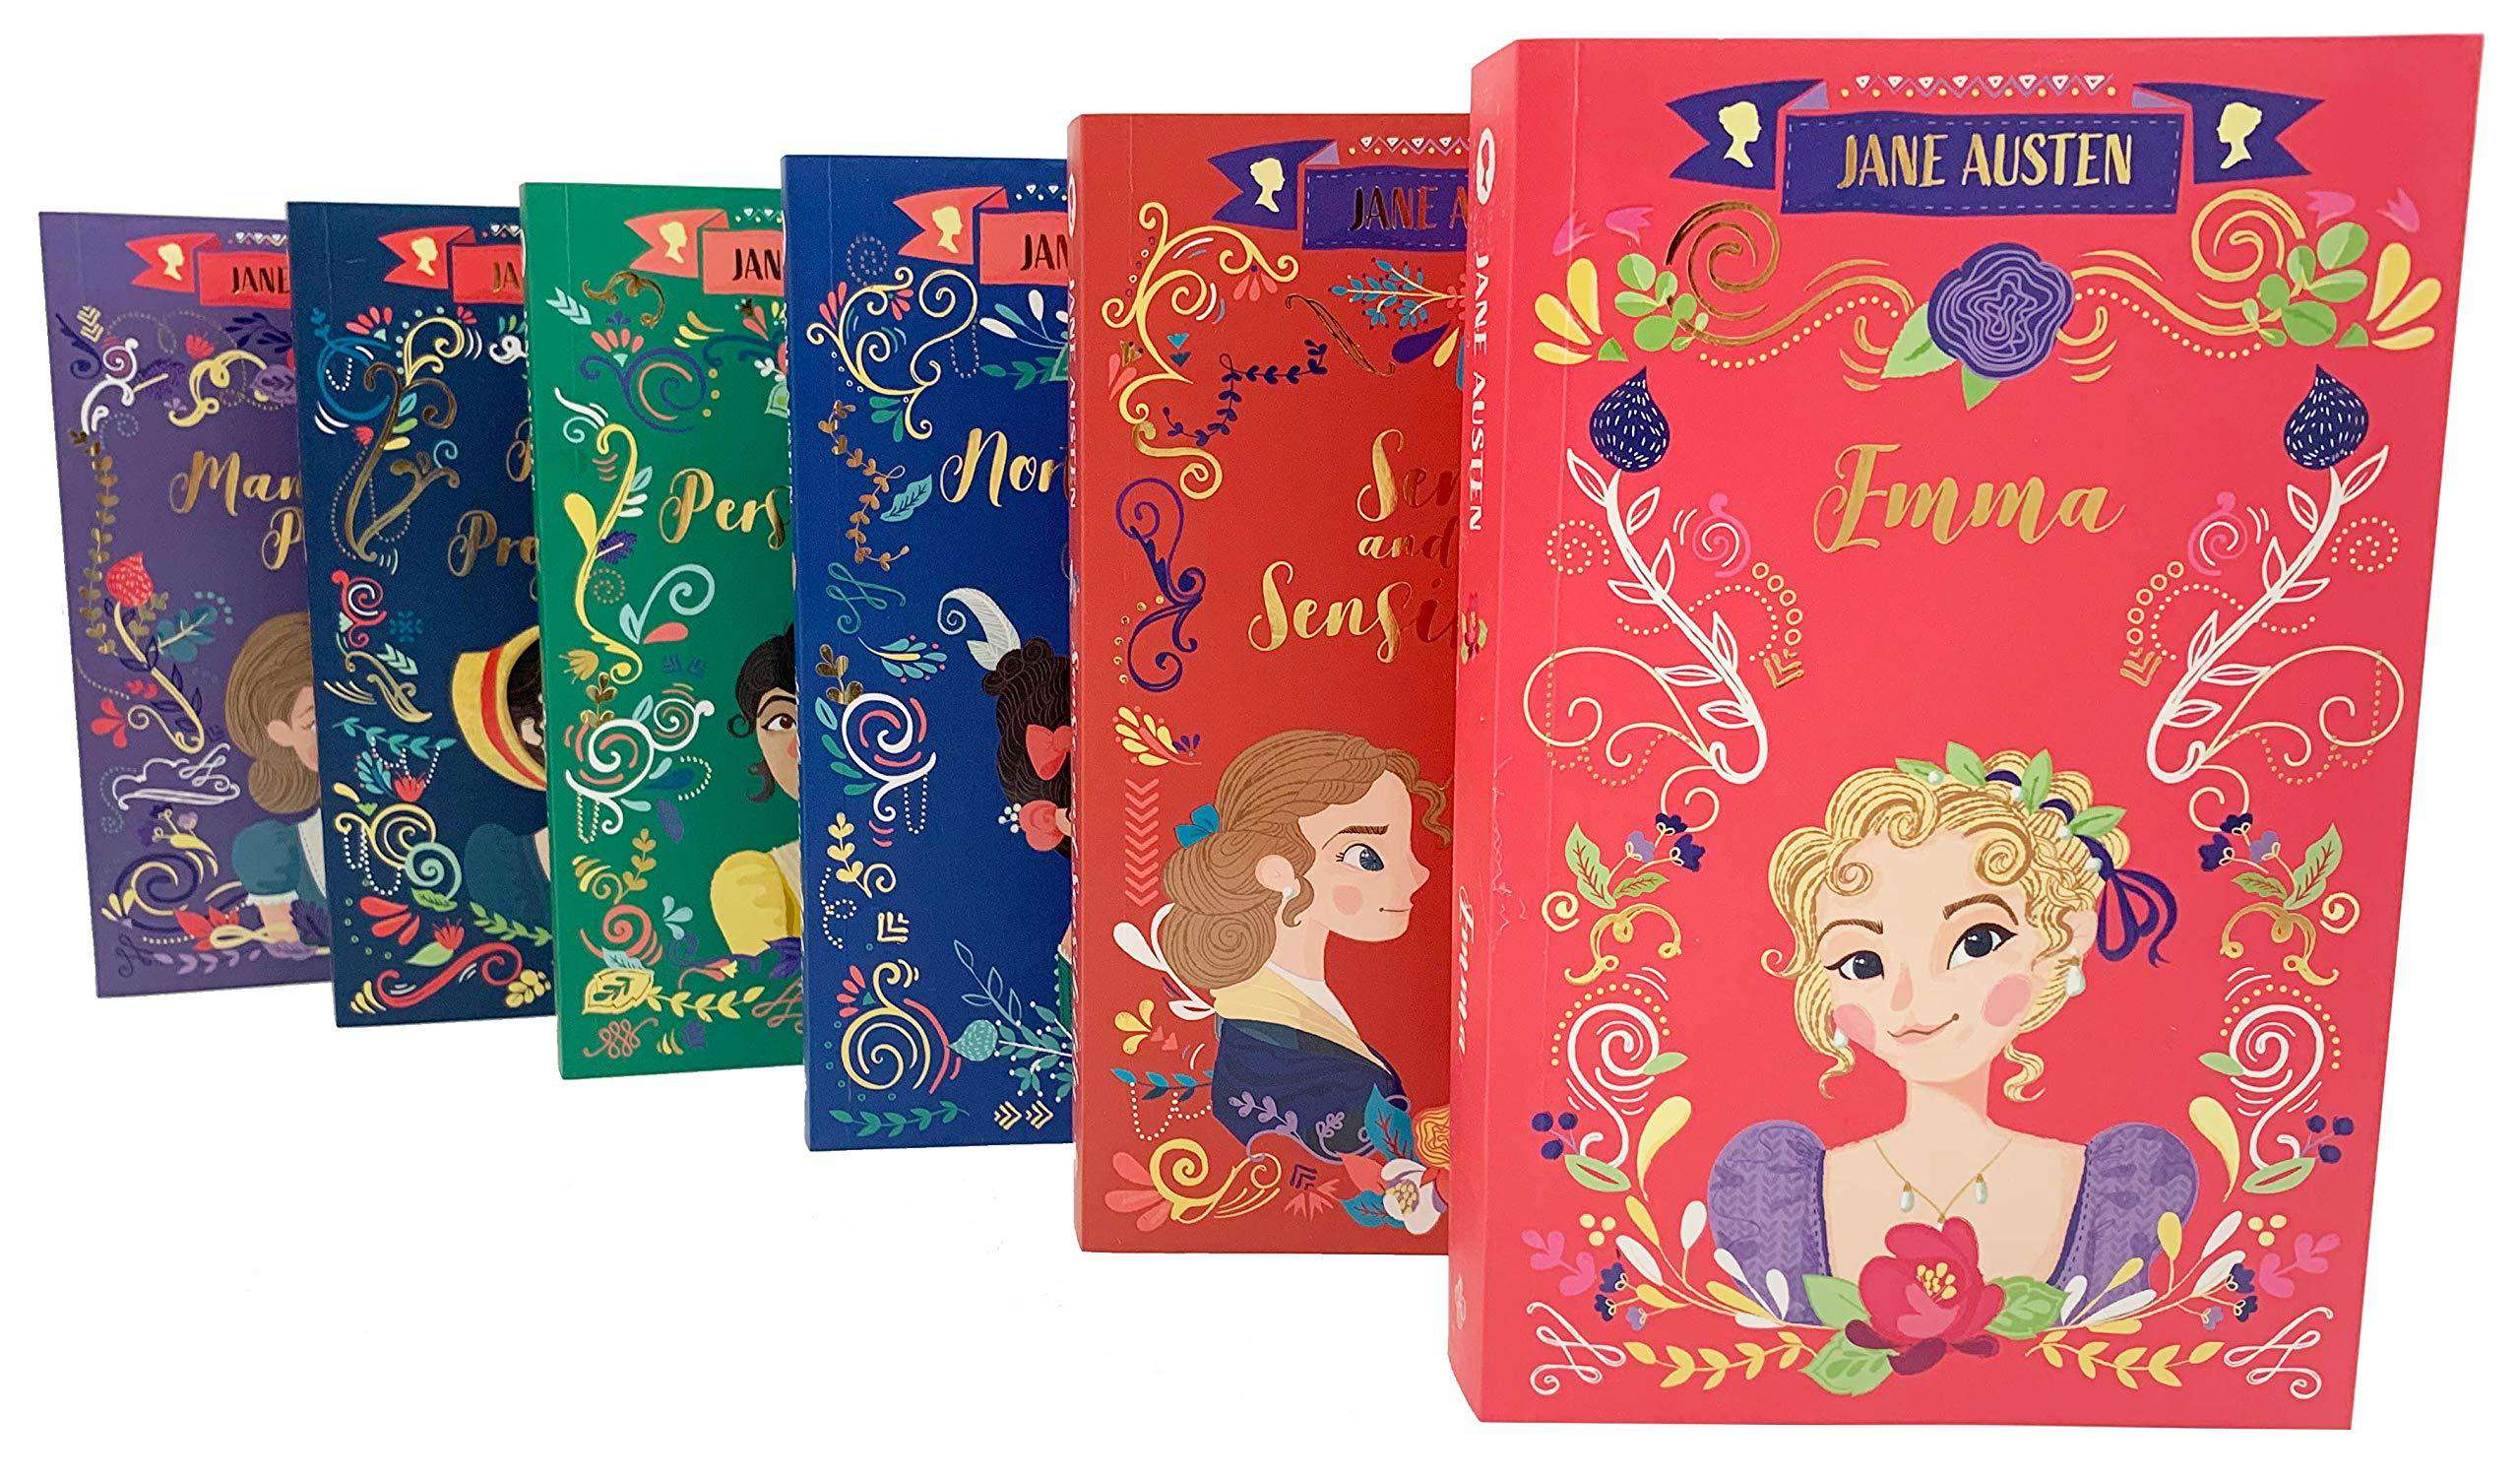 Jane Austen 6 Books Young Adult Collection Box Set Paperback by Jane Austen - St Stephens Books